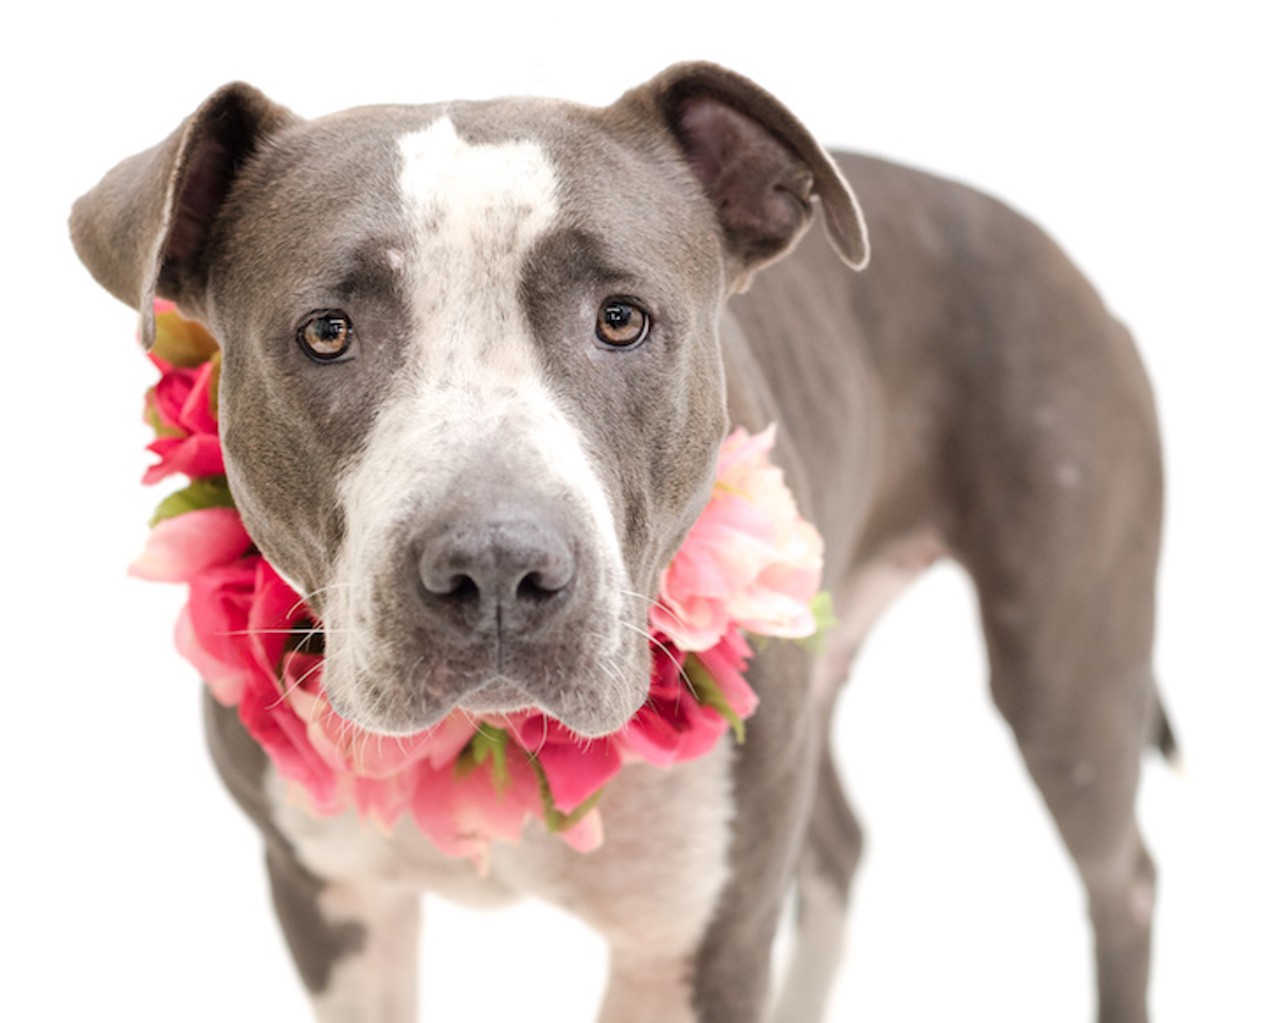 14 fabulous dogs you can adopt right now in Orange County